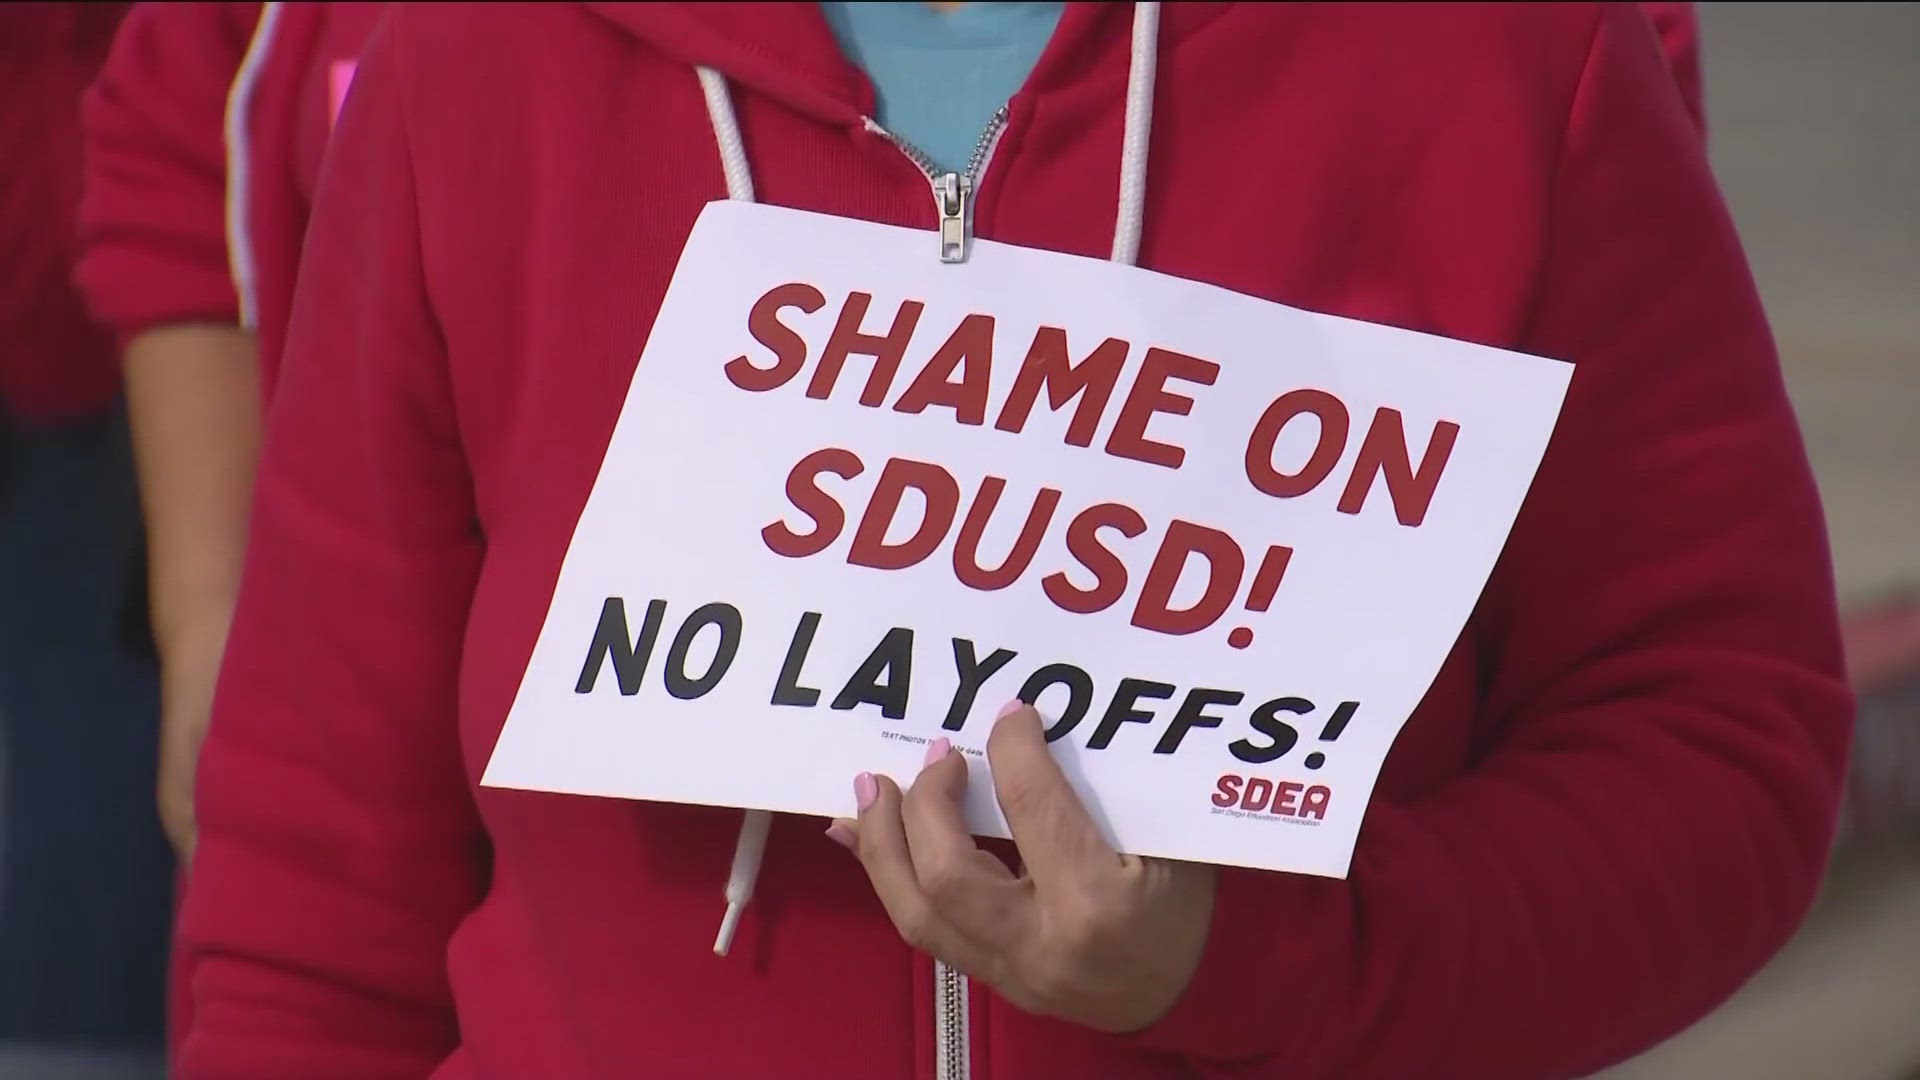 The second largest school district in California rescinded 225 of the preliminary 234 layoff notices it had issued in March to educators.